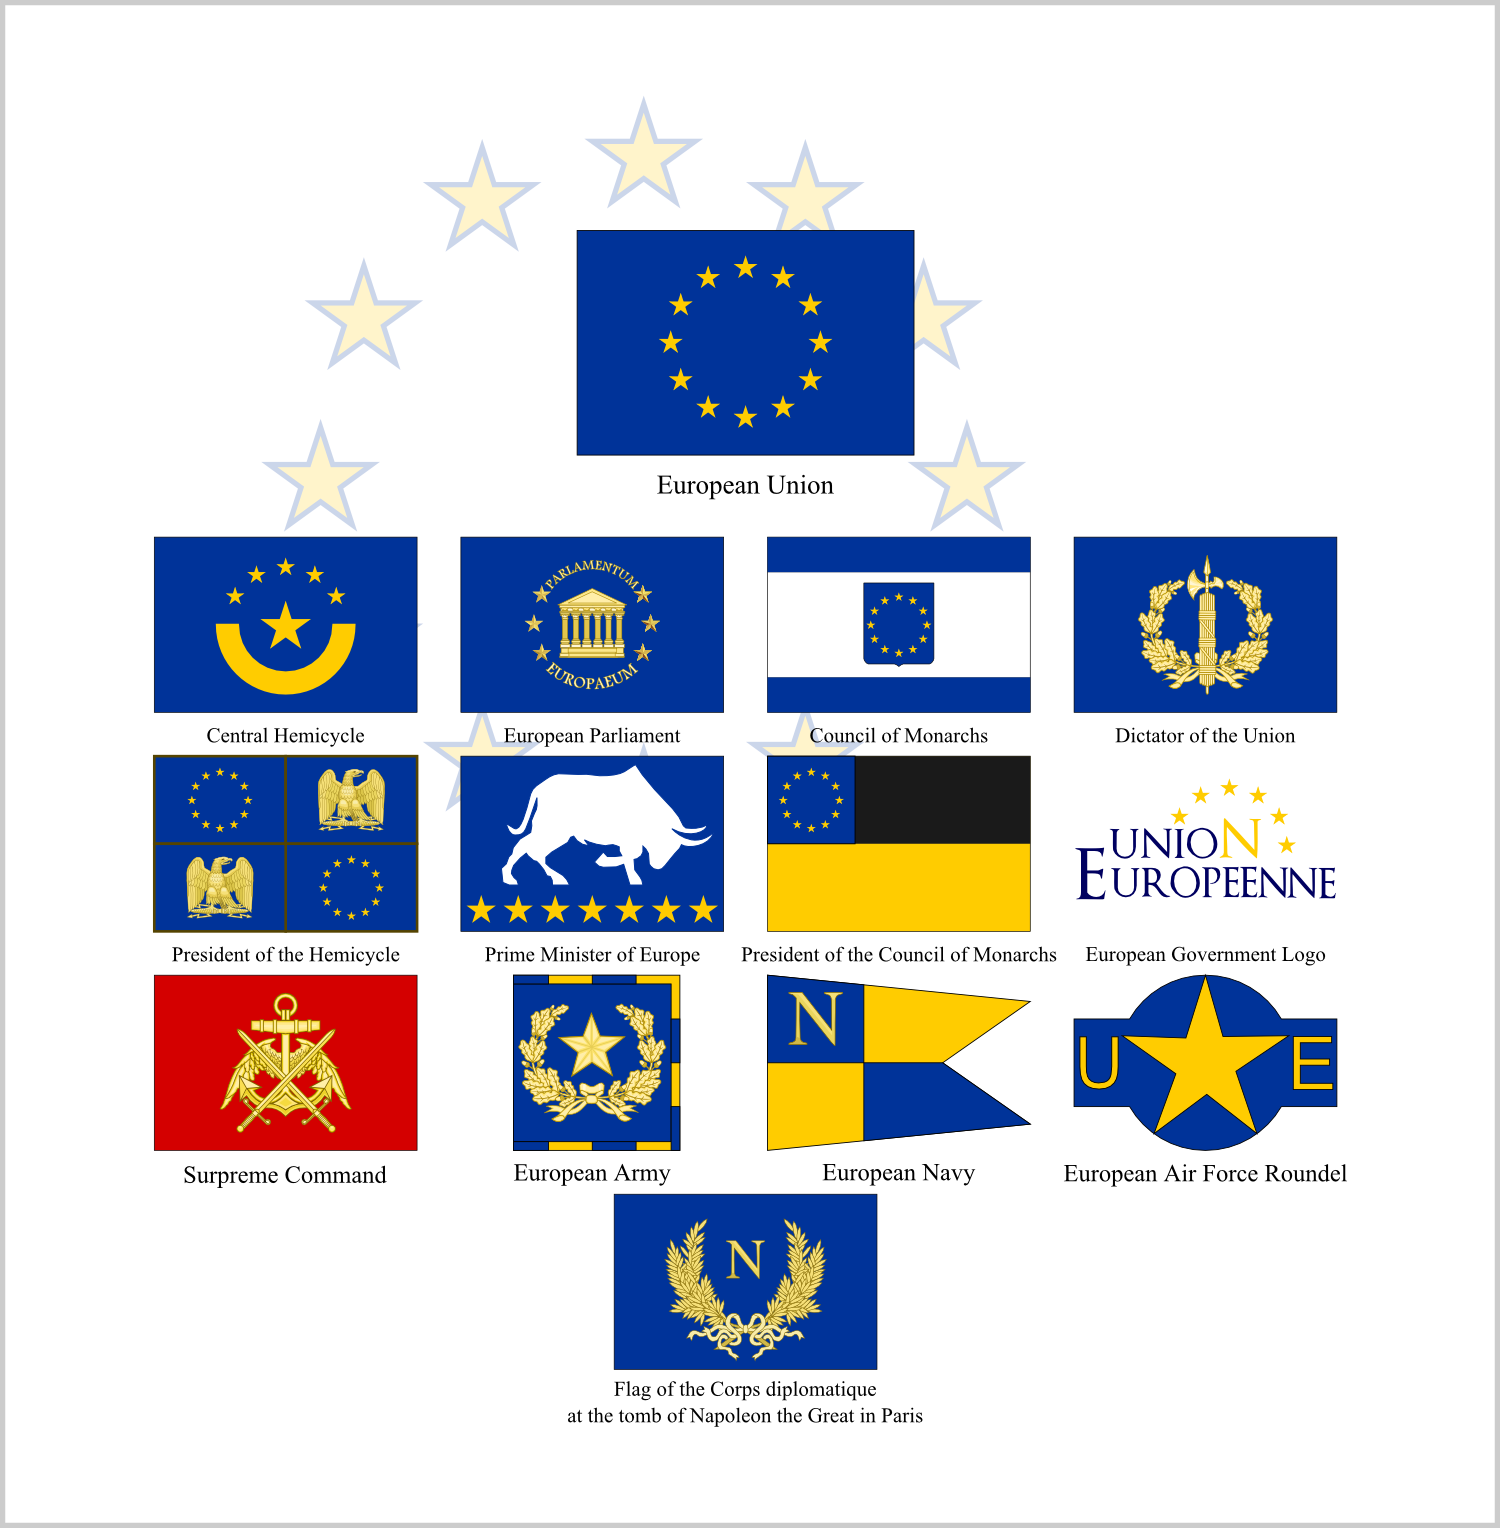 flags_of_the_european_union_by_firelord_zuko-d4z8mq8.png